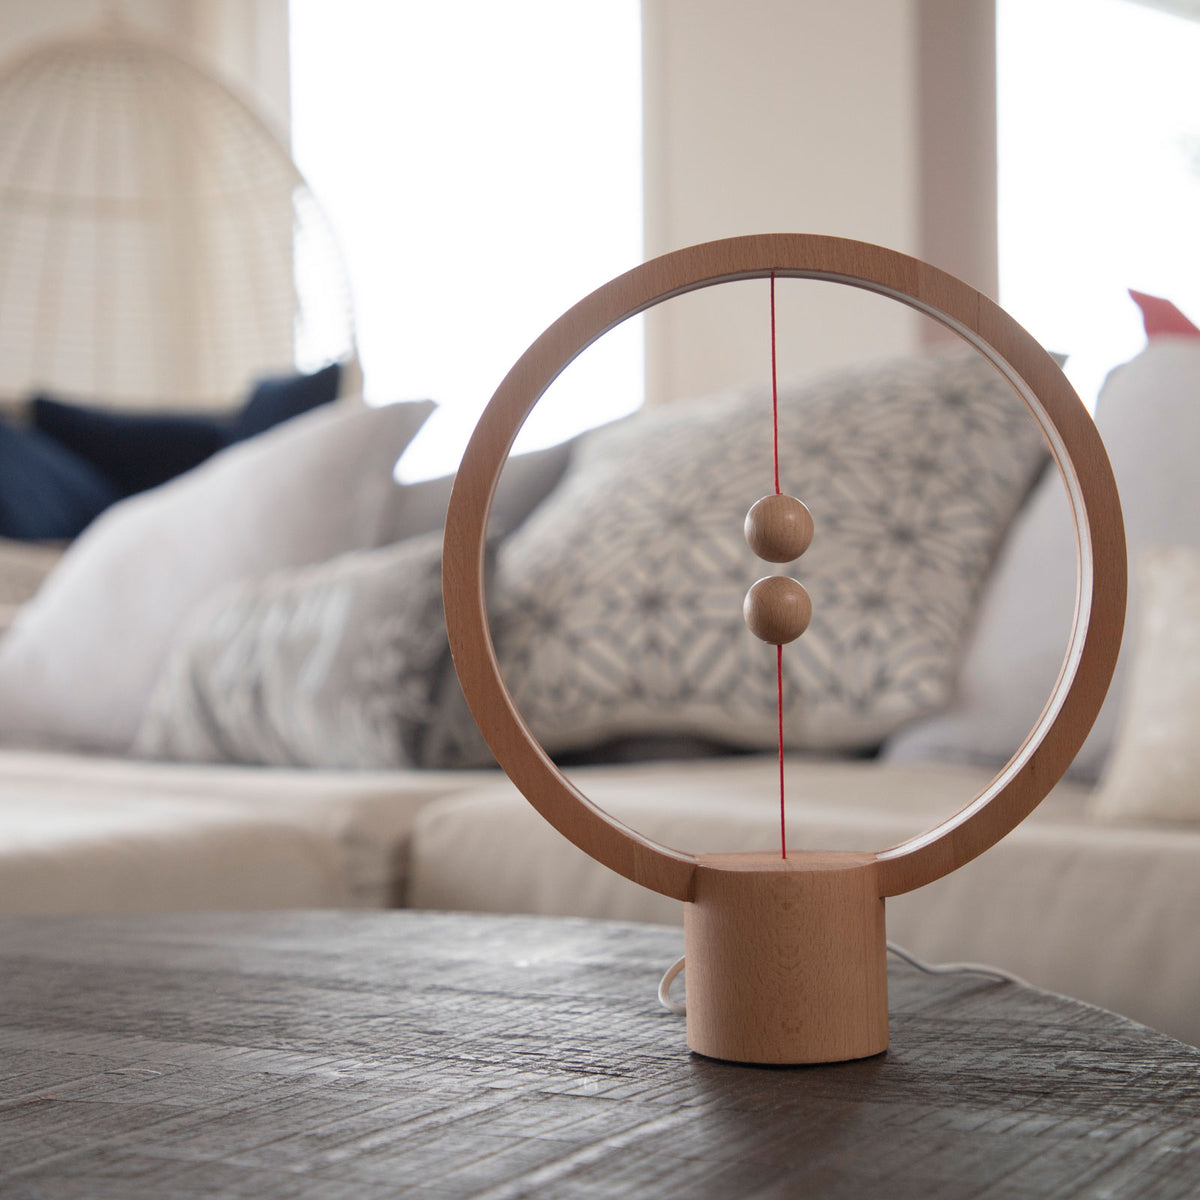 The Heng Round Light Wood on a living room table.